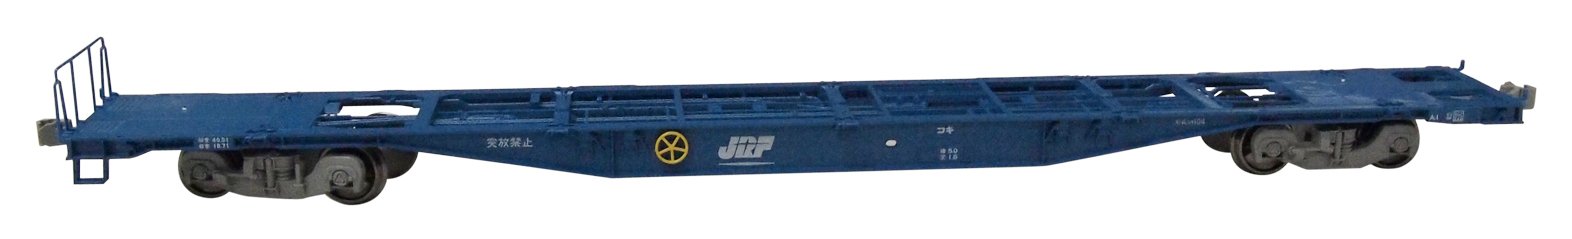 Tomytec HO Gauge Koki104 Model Freight Car without Container - Tomix HO-723 Railway Model